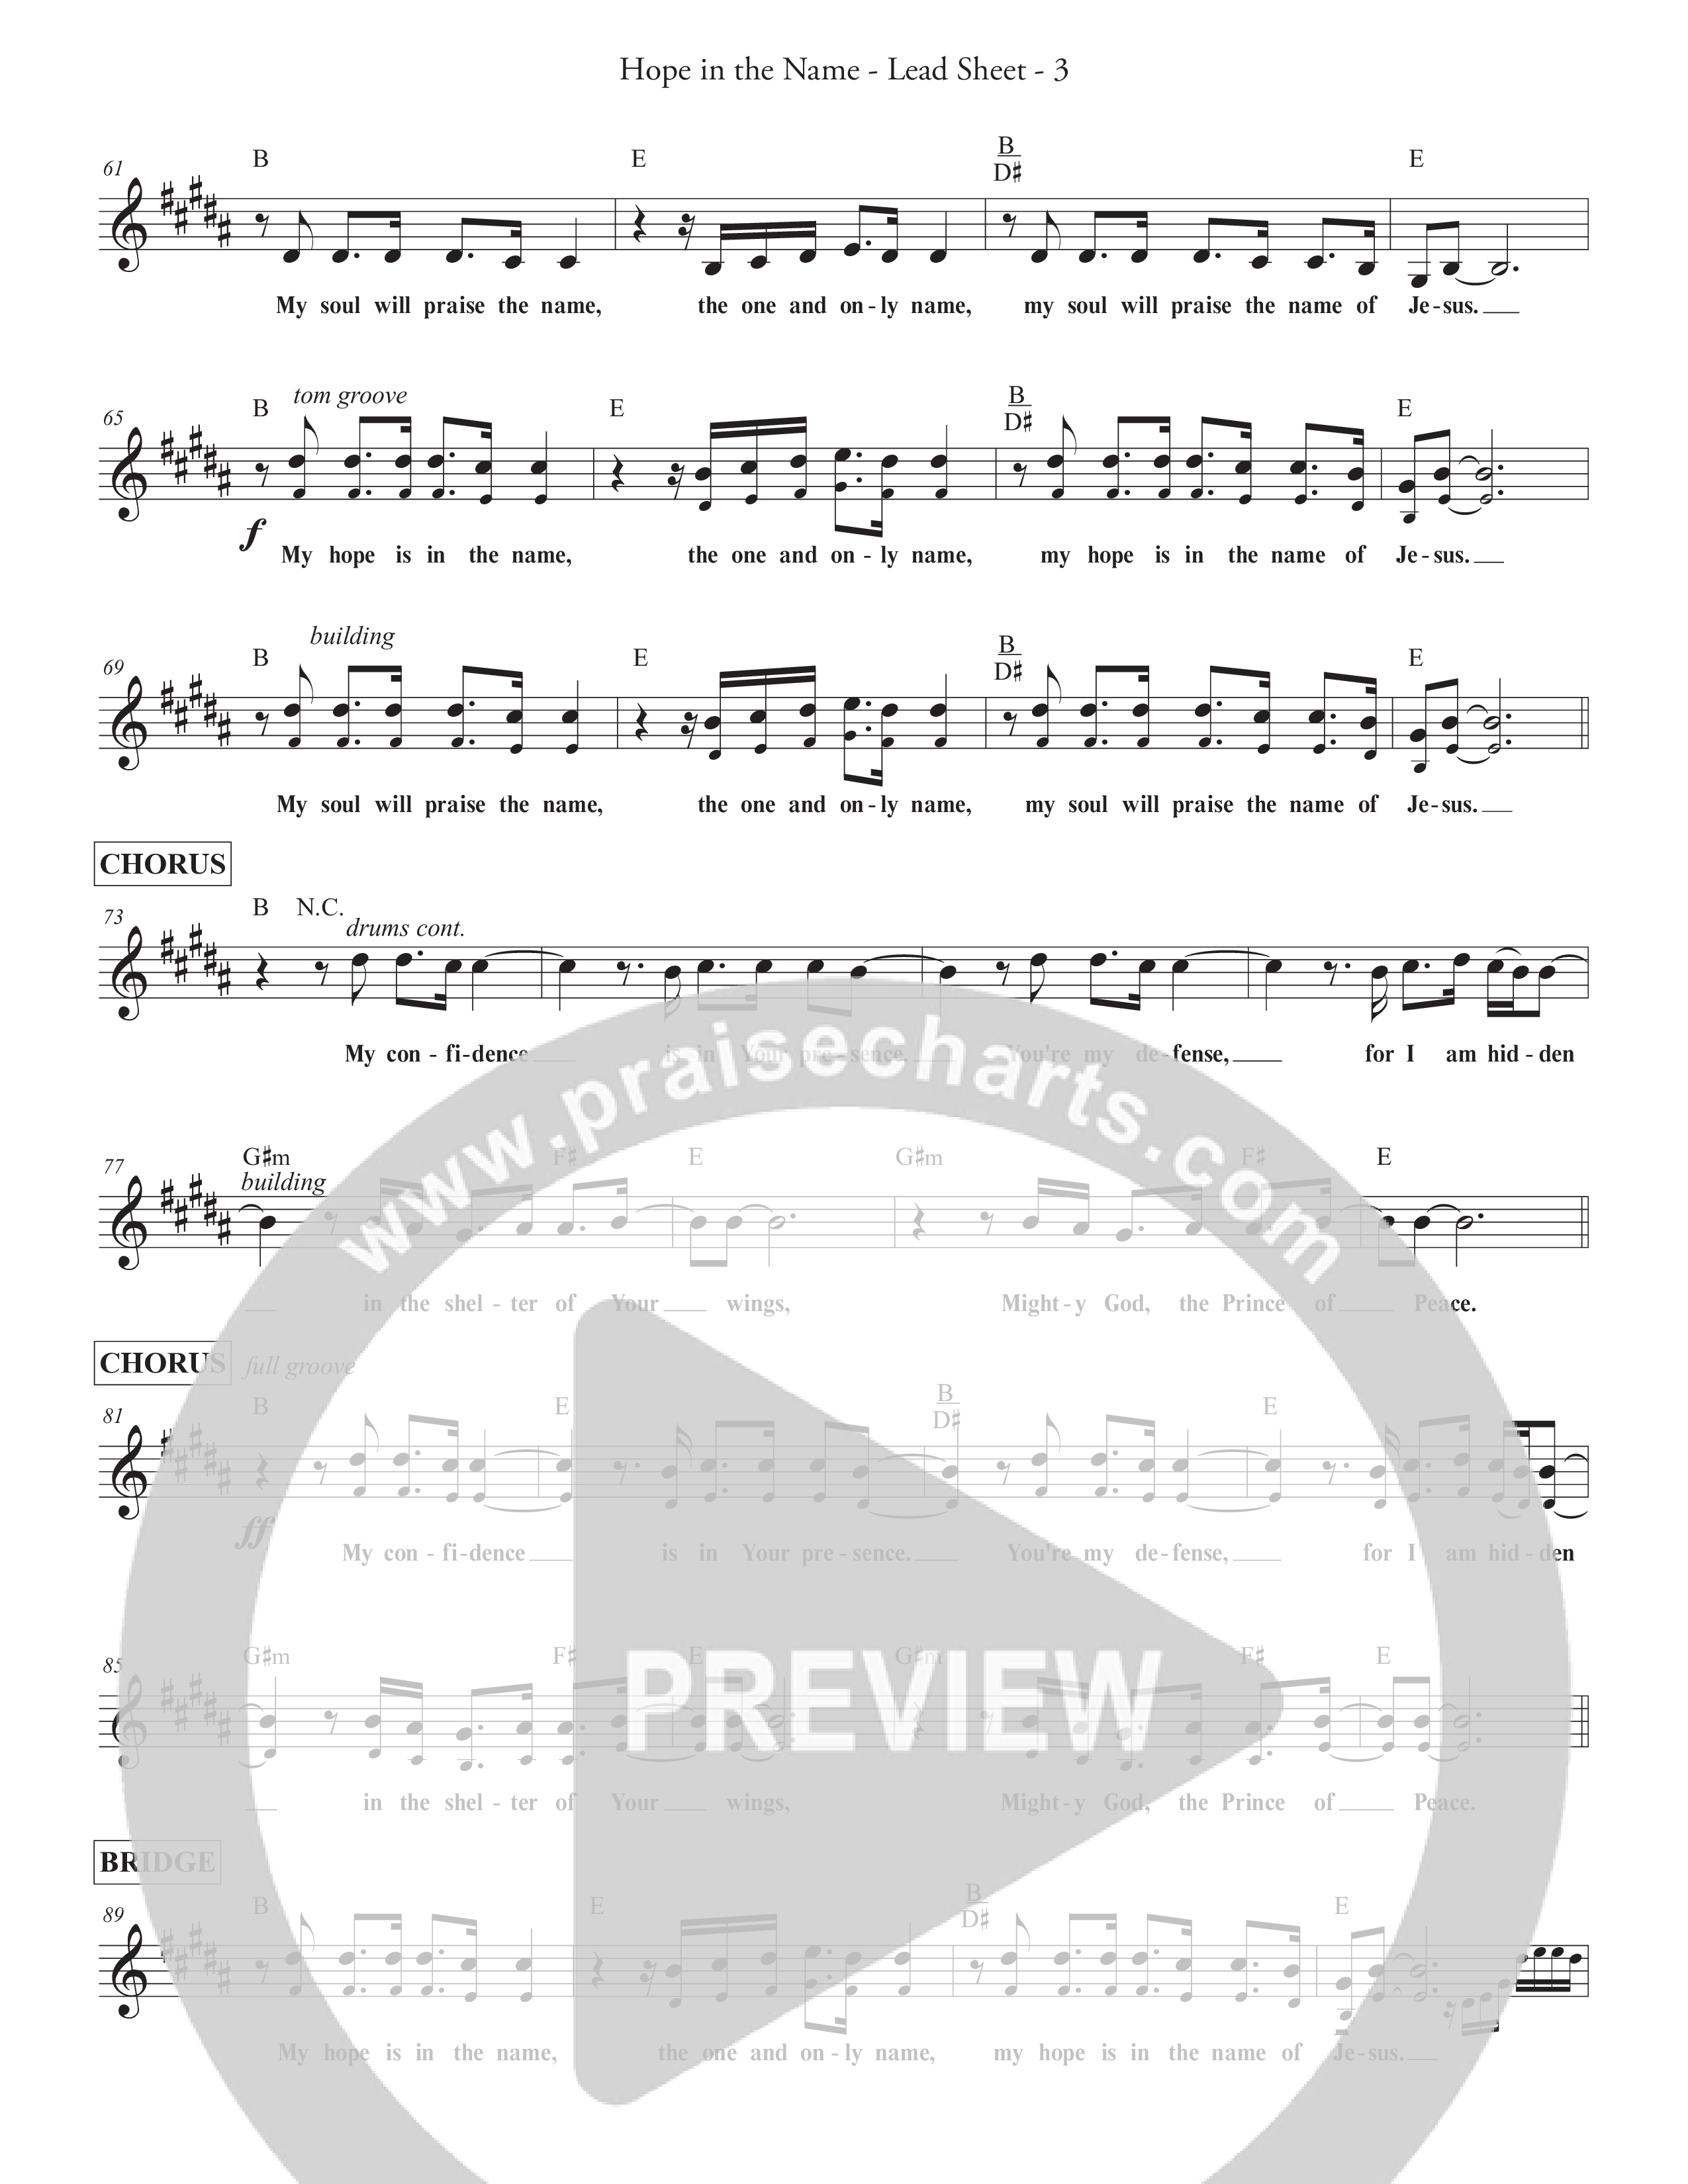 Hope In The Name Lead Sheet (SAT) (Redemption Worship)